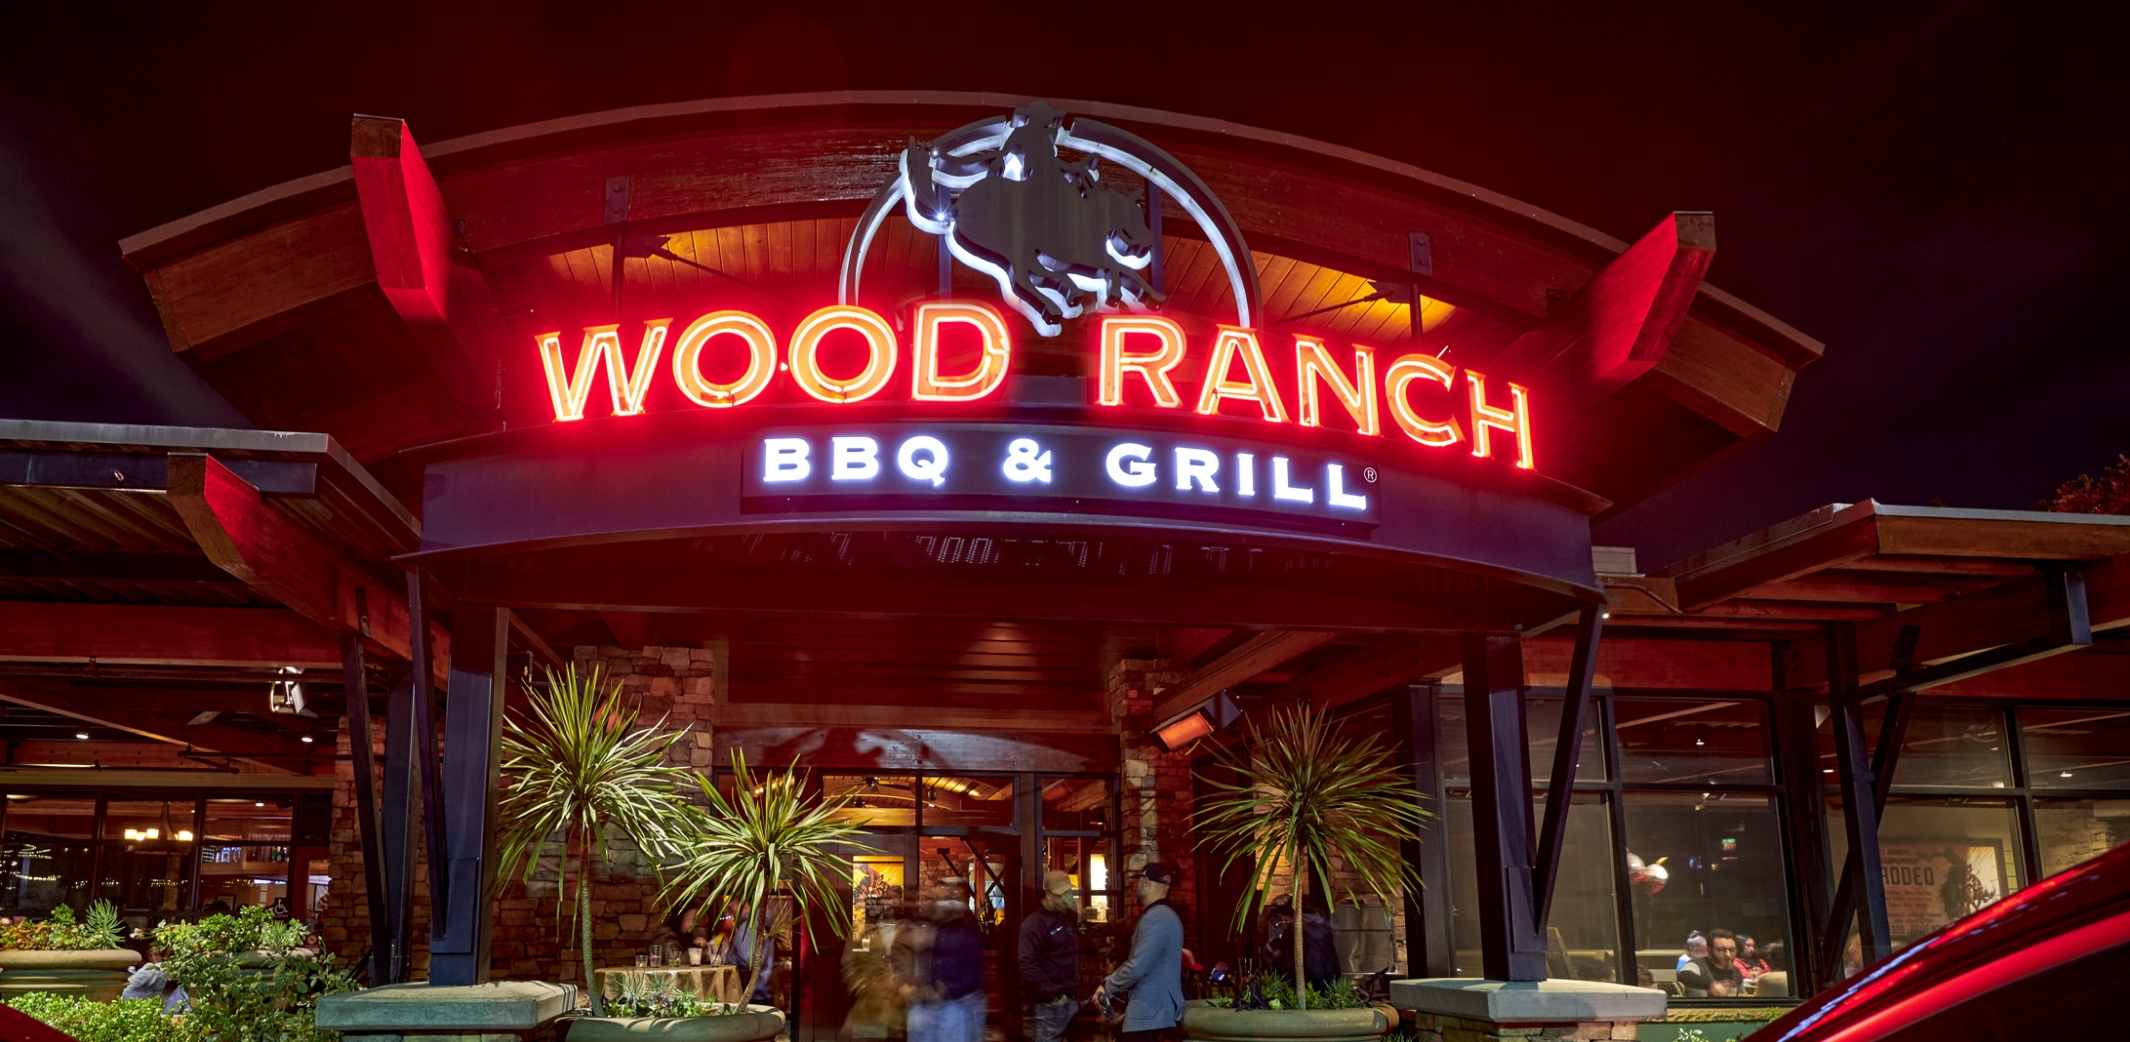 Nighttime view of the entrance to Wood Ranch BBQ & Grill in Chino Hills, with vibrant neon signage and guests entering, highlighting the restaurant's busy and welcoming environment.